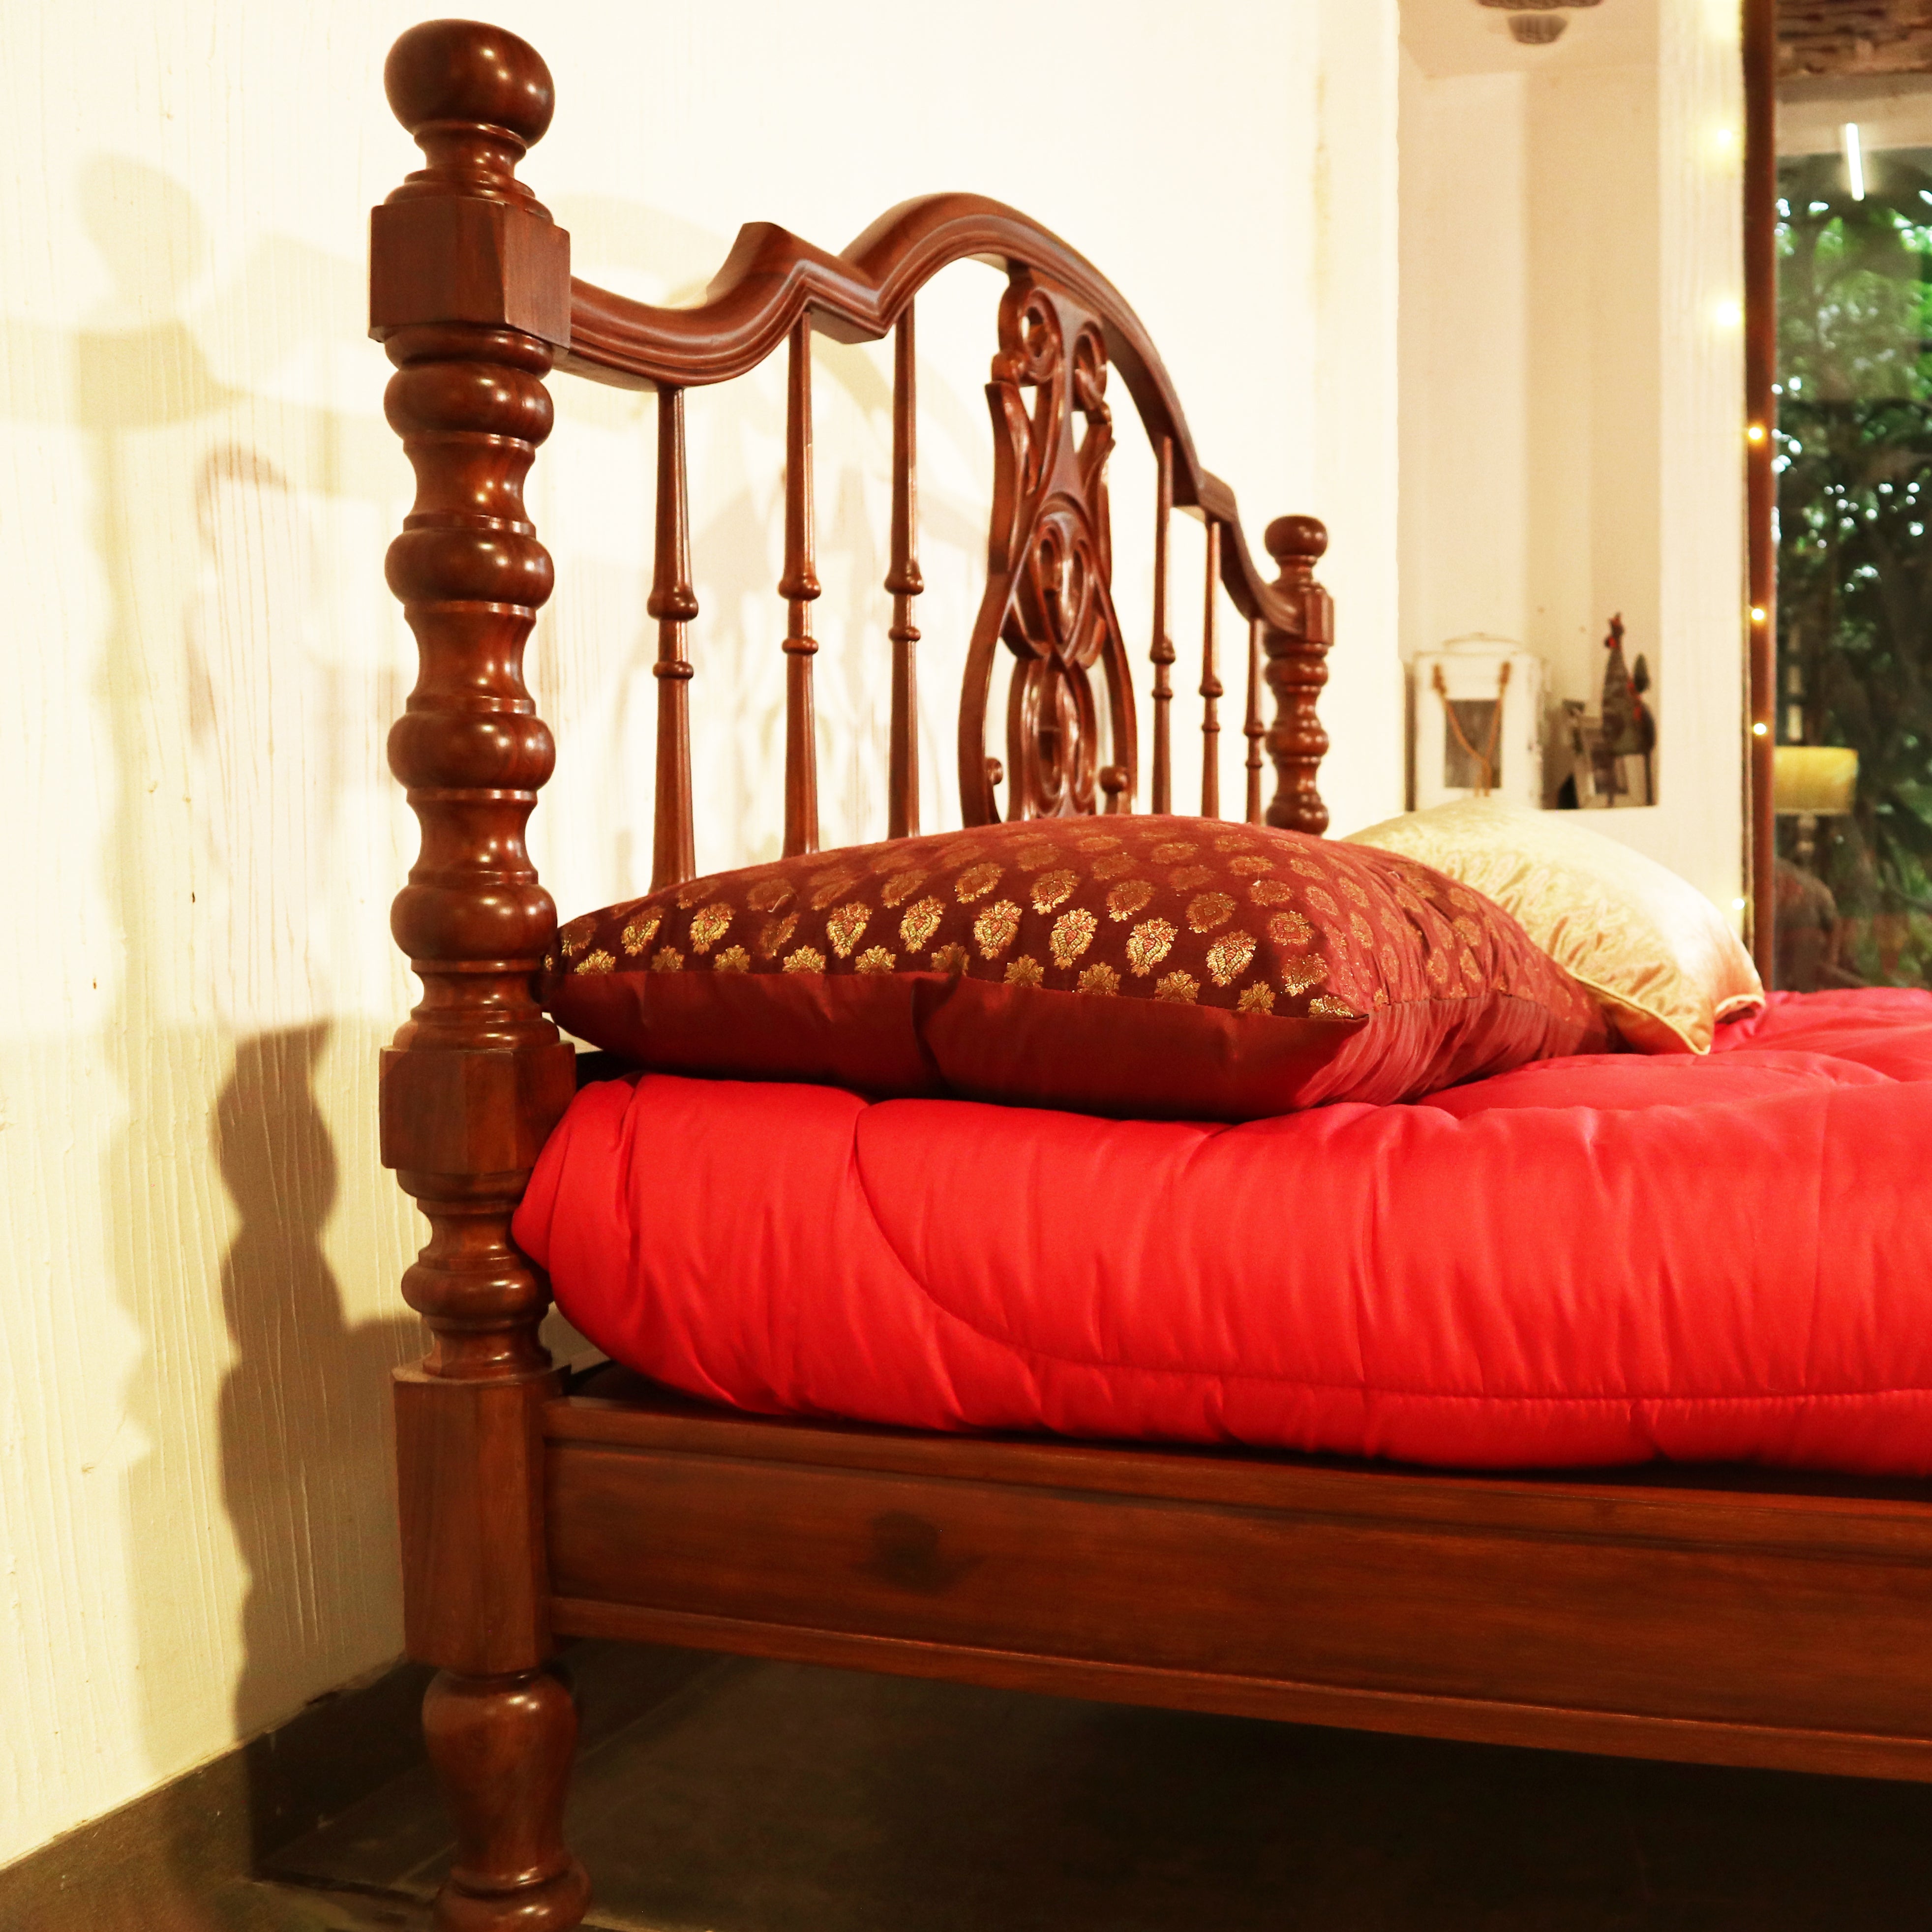 Pondi bed without posters